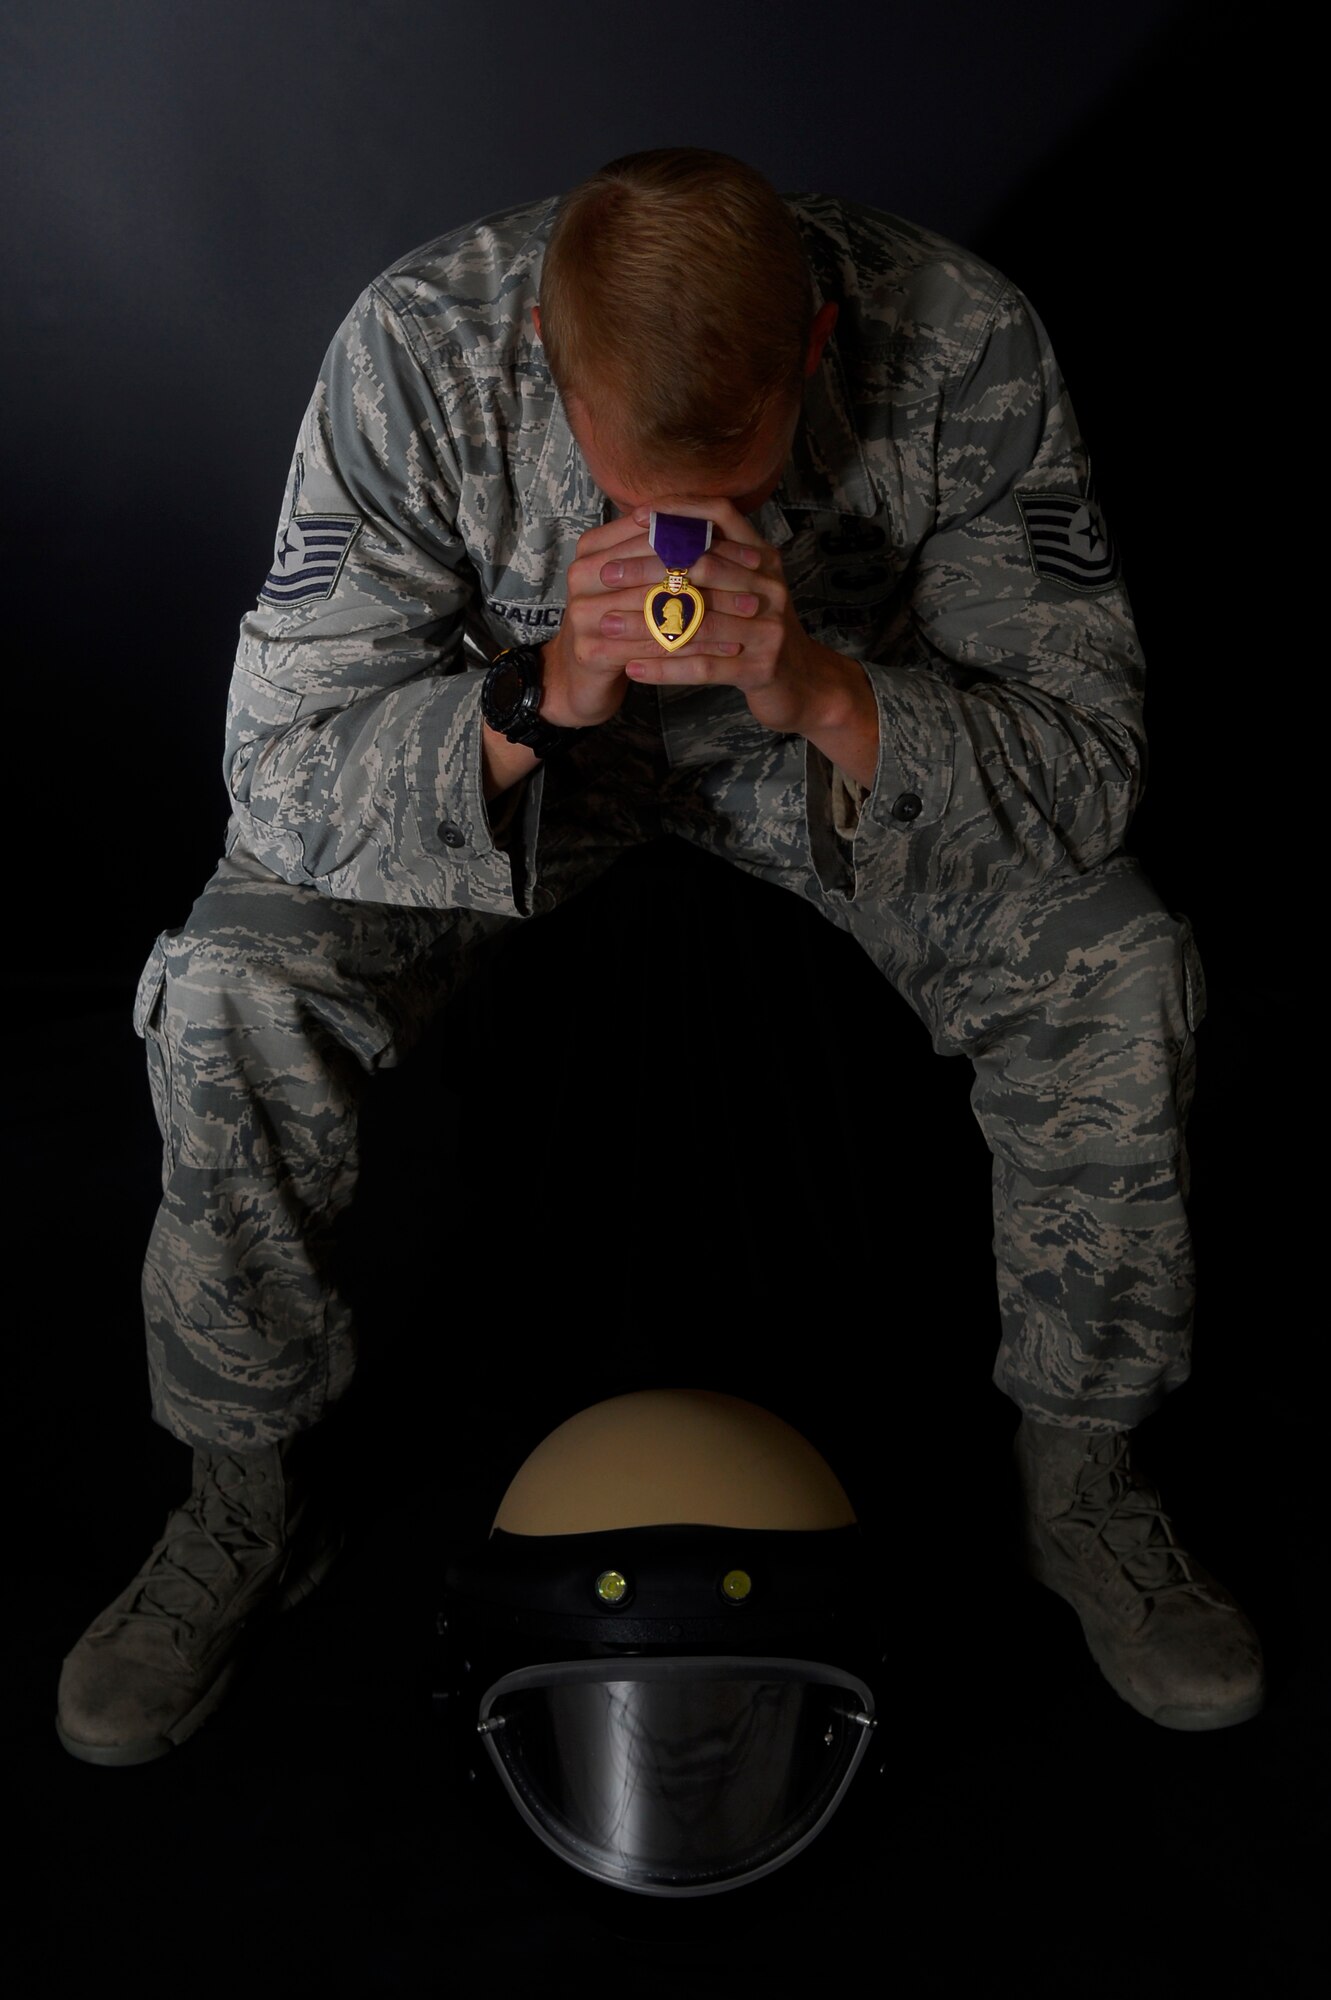 Tech. Sgt. Steven Dauck, 56th Civil Engineer Squadron explosive ordinance disposal team leader, holds the Purple Heart Medal Nov. 30, 2016, at Luke Air Force Base, Ariz. Dauck received his Purple Heart for his actions during a route clearance patrol where he was hit by an improvised explosive device in Afghanistan, Oct. 28, 2011. (U.S. Air Force photo by Airman 1st Class Alexander Cook)  